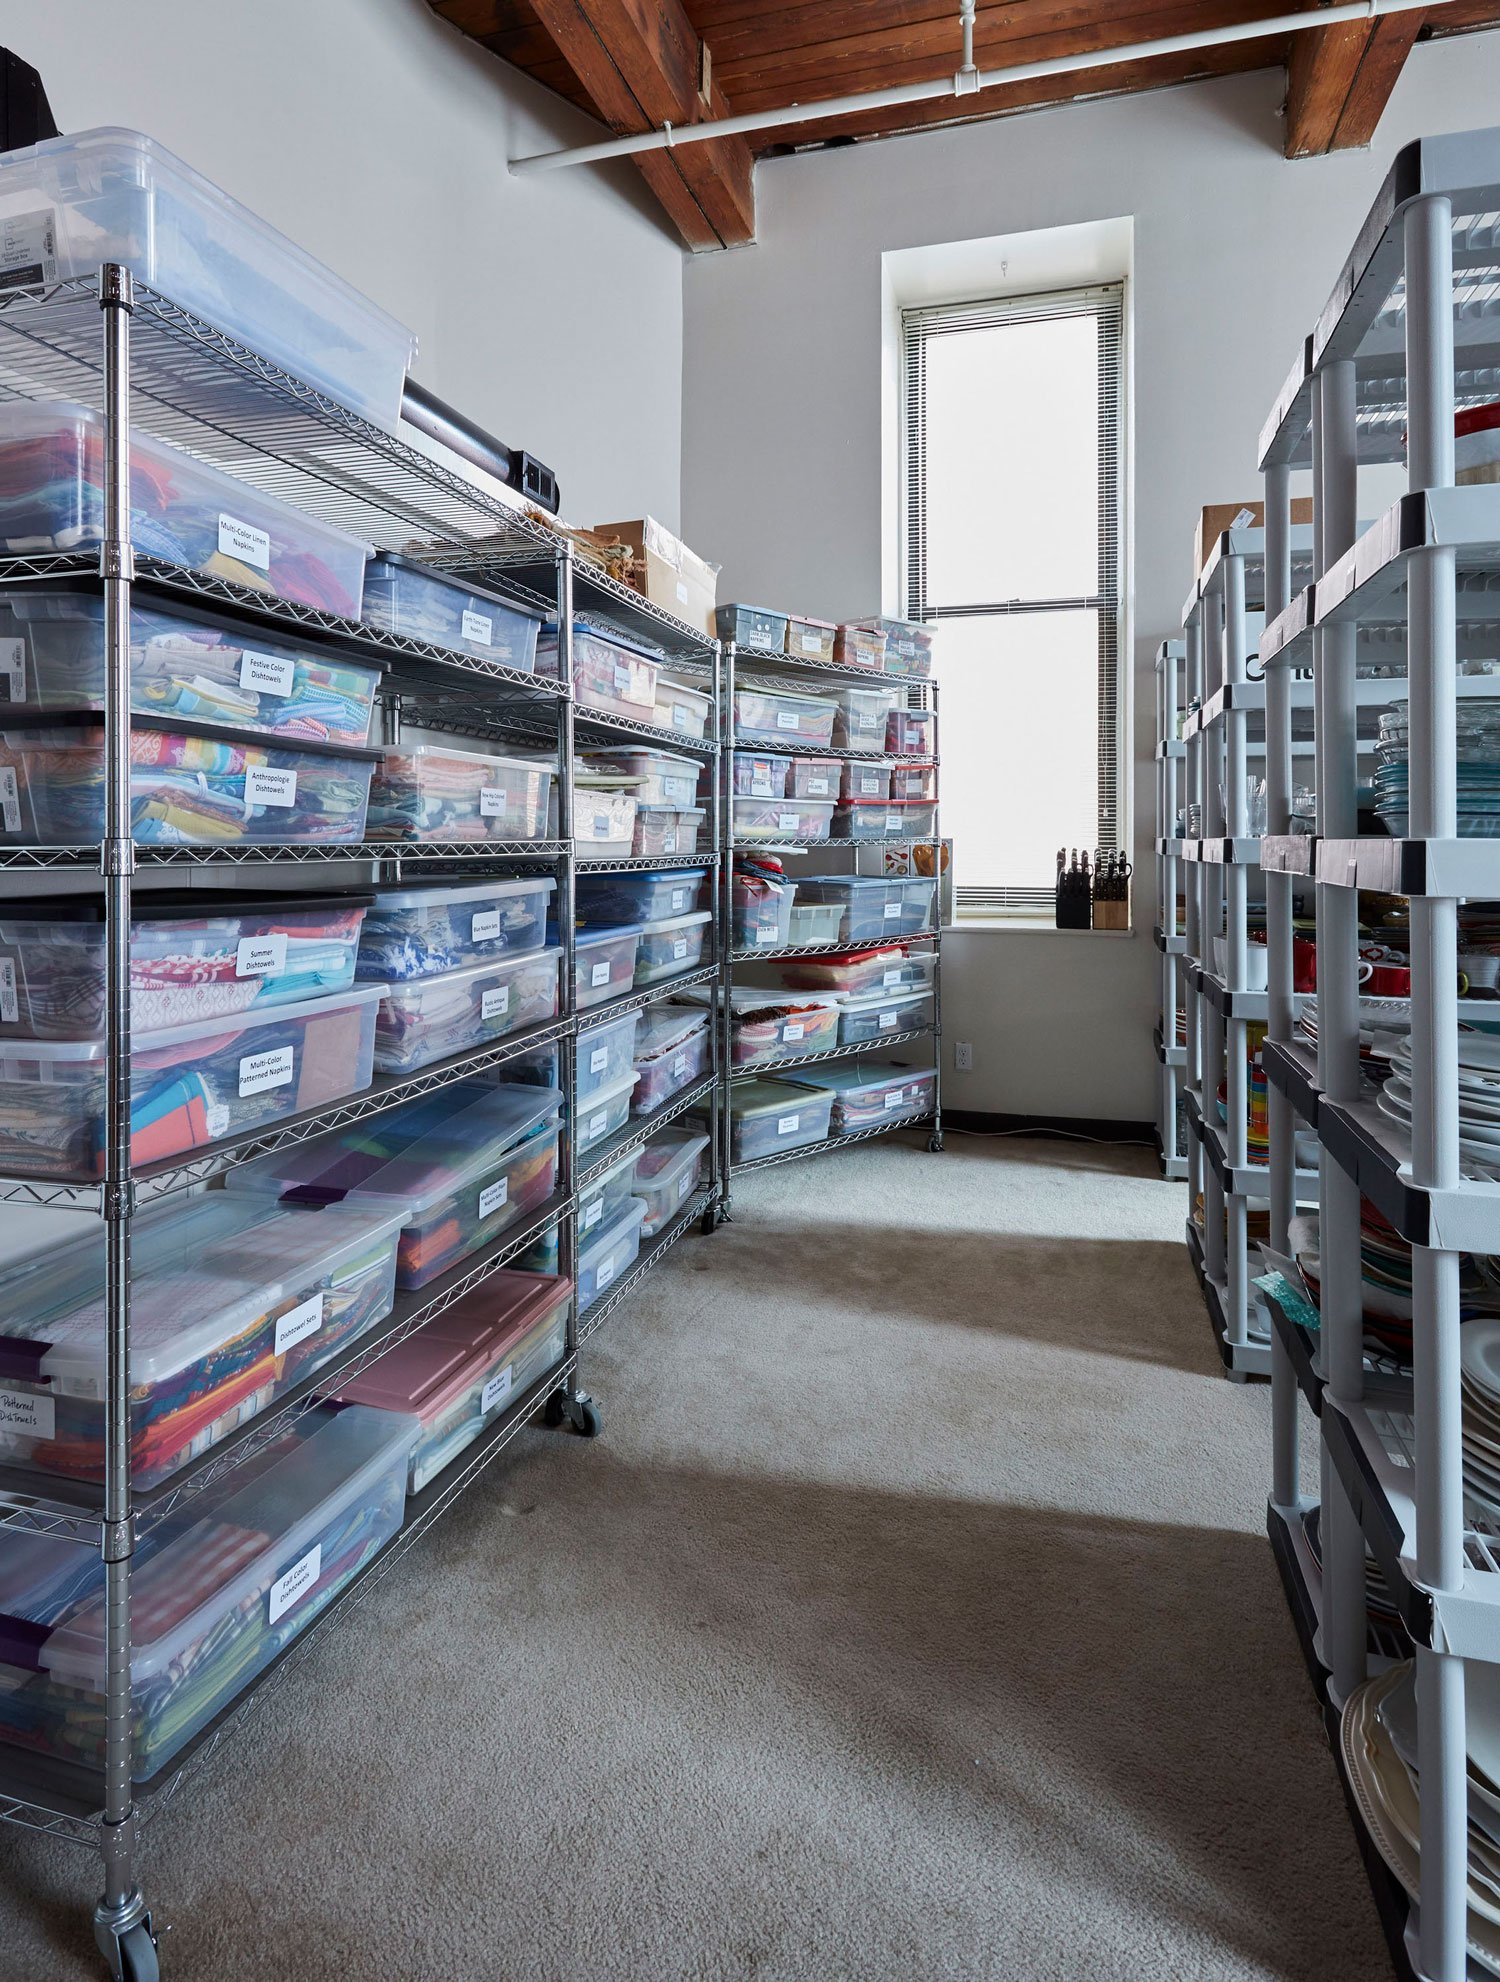 Michael Pohuski's photograph of his meticulously organized Prop Room